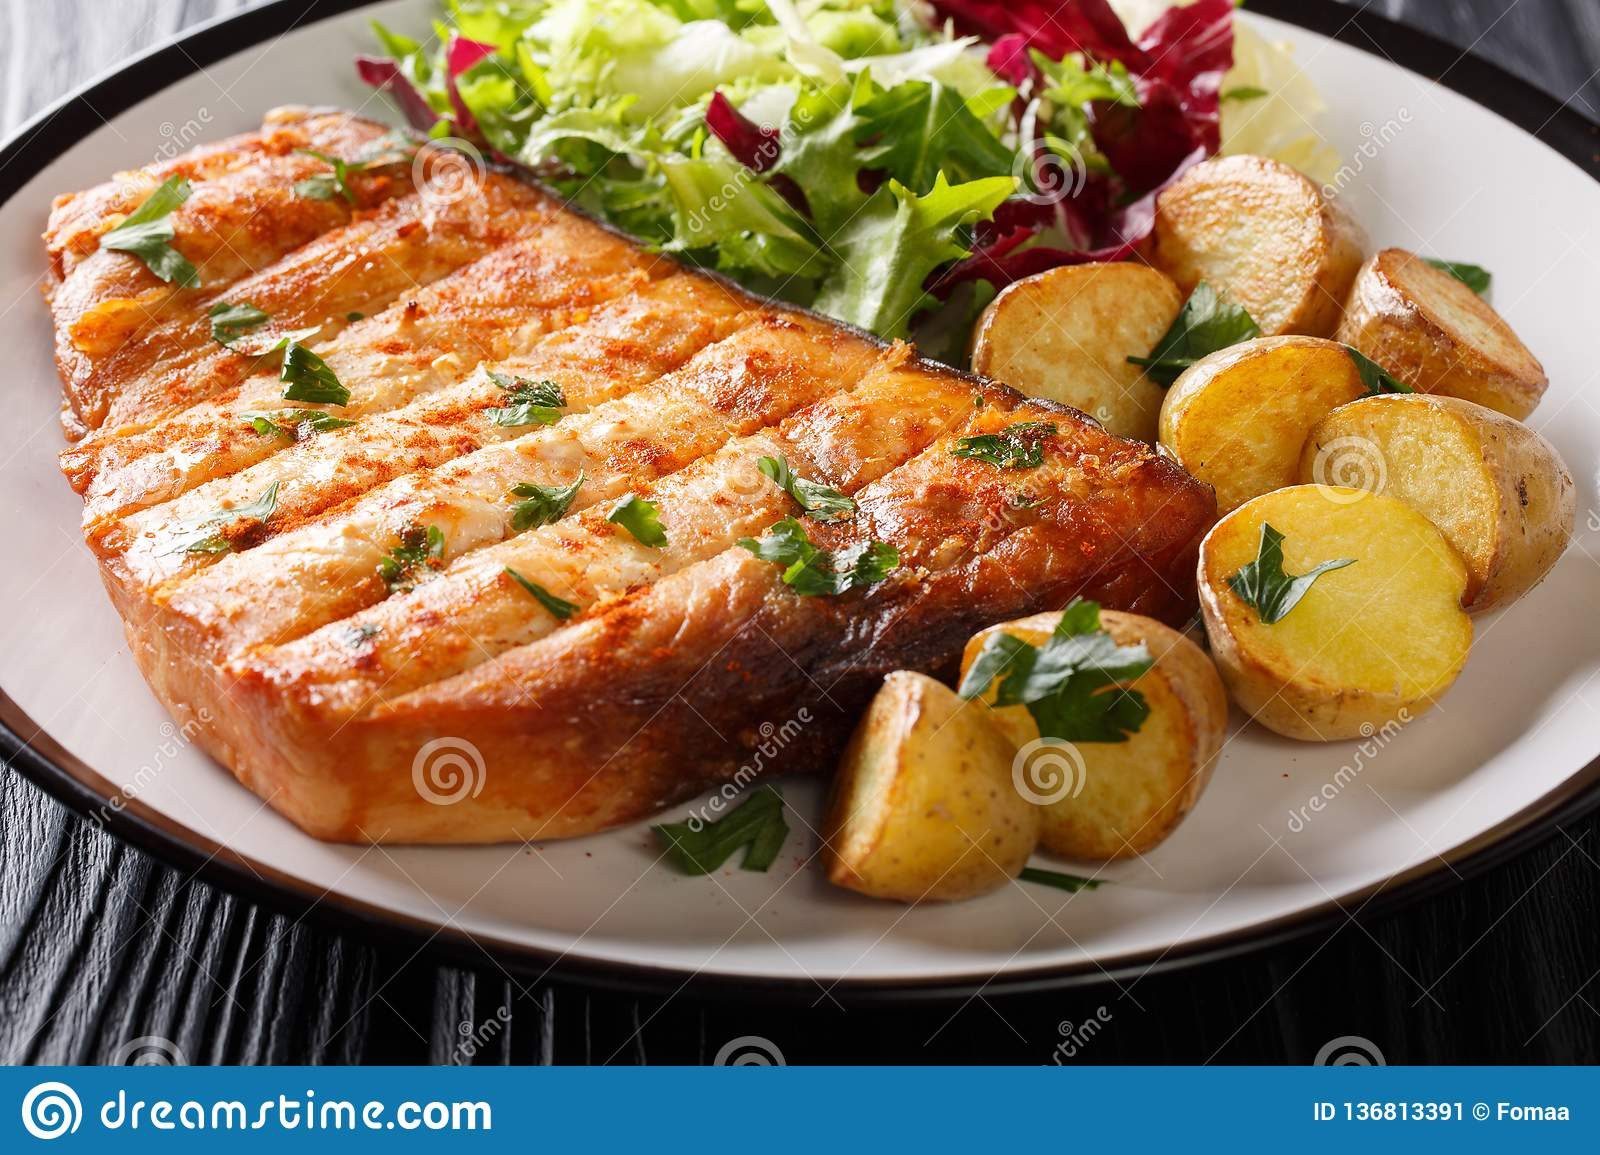 Swordfish Side Dishes Grilled Swordfish With A Side Dish Fried Potatoes And